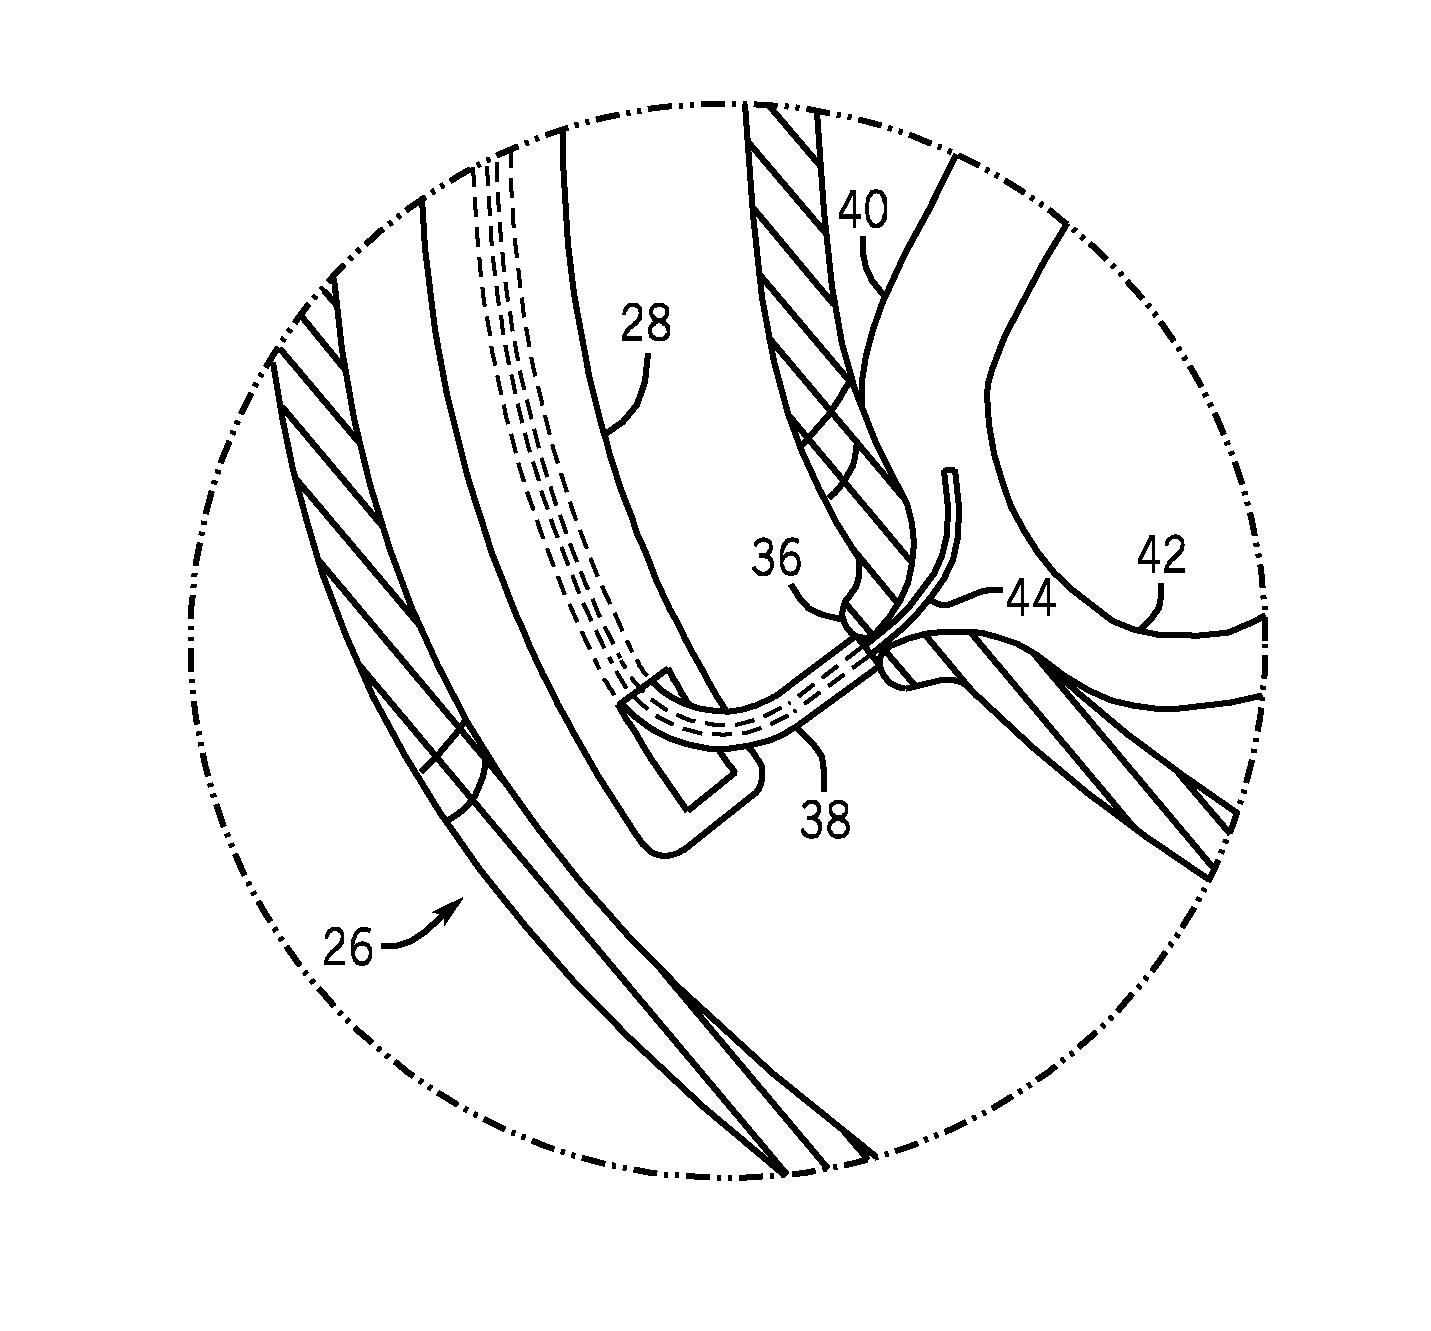 Methods and apparatuses for endoscopic retrograde cholangiopancreatography